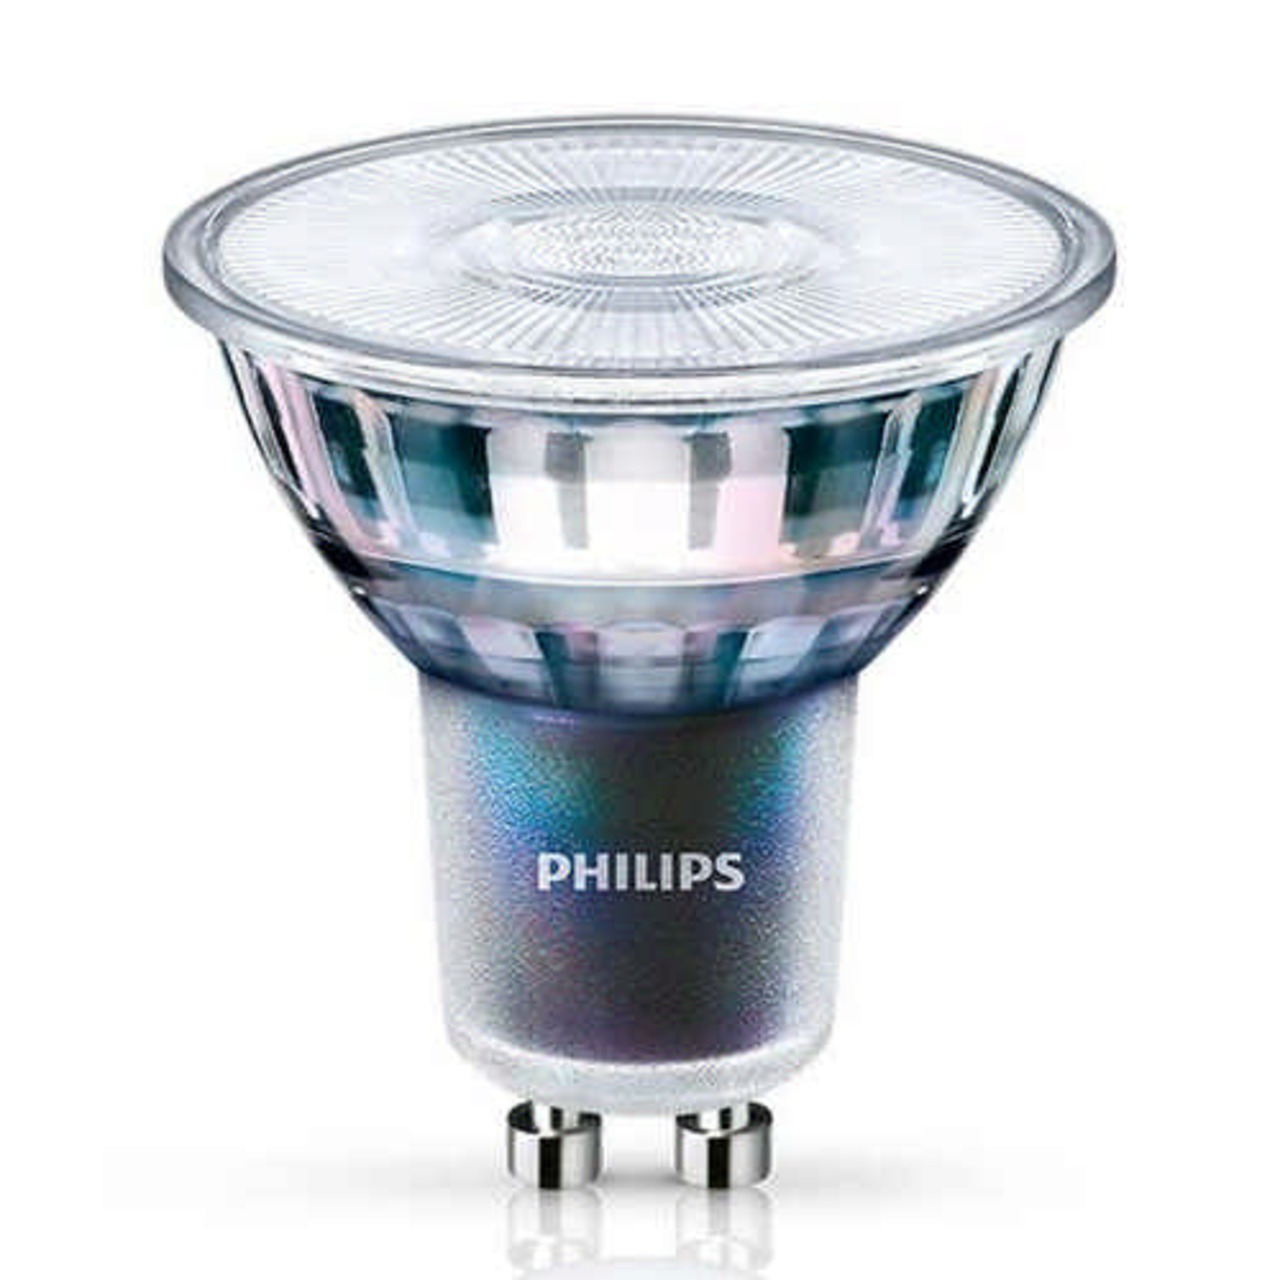 Philips MASTER ExpertColor 3-9-W-GU10-LED-Lampe- 280 lm- 97 Ra- 36- 3000K- warmweiss- dimmbar